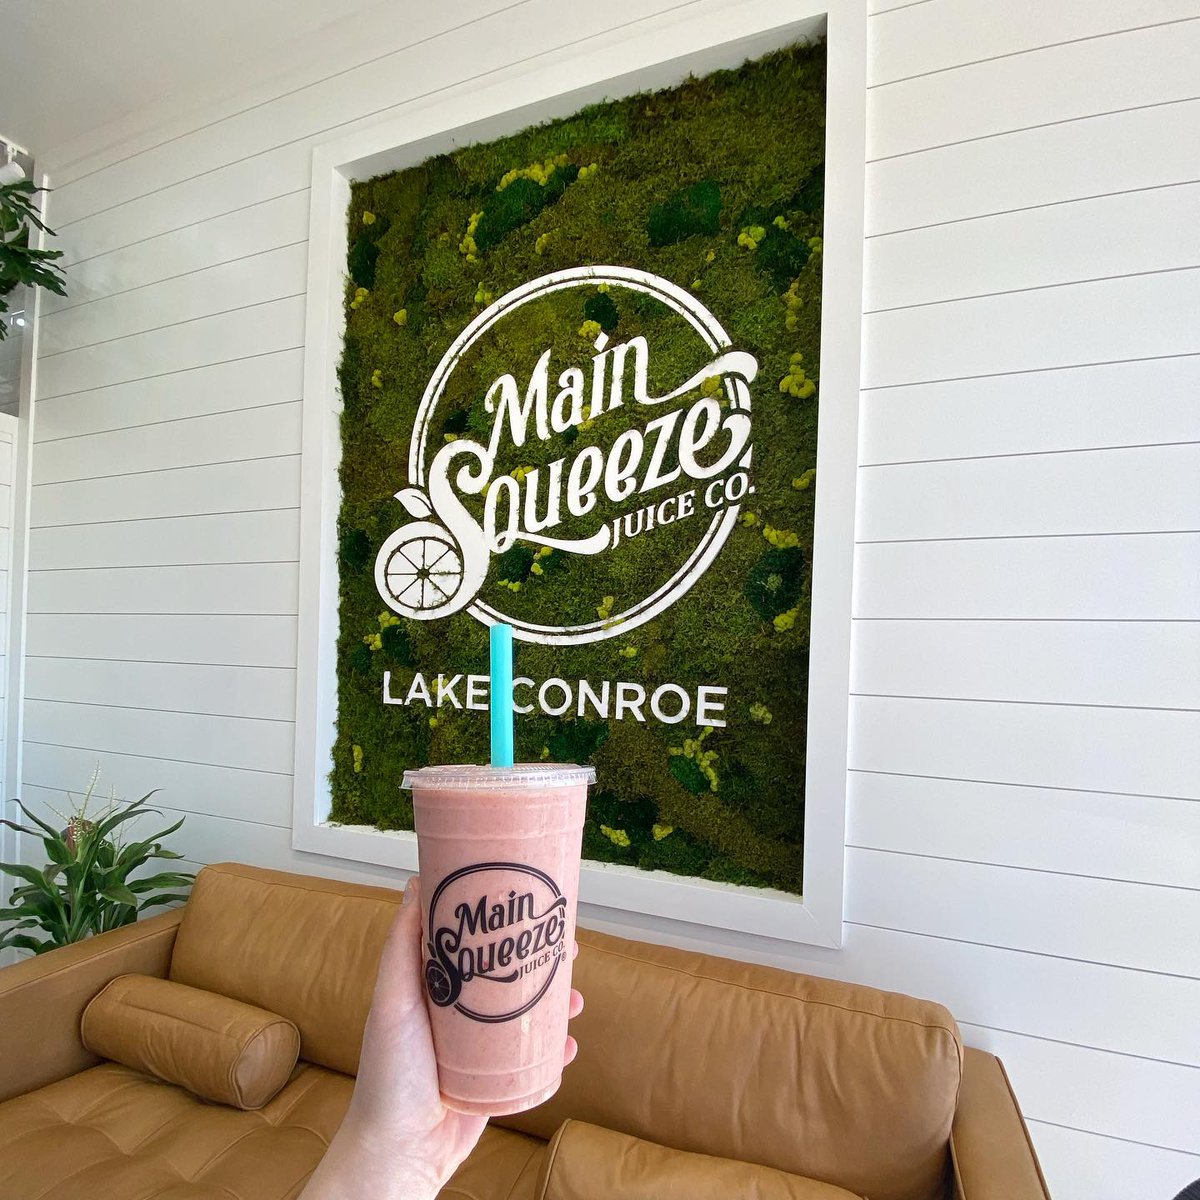 @mainsqzjuiceco opened on #LakeConroe recently! They make the best smoothies, cold-pressed juices, acaí bowls, and more! Come get your daily dose of fresh fruits and veggies here! 📷: Liv #VisitConroe bit.ly/2TSwu58